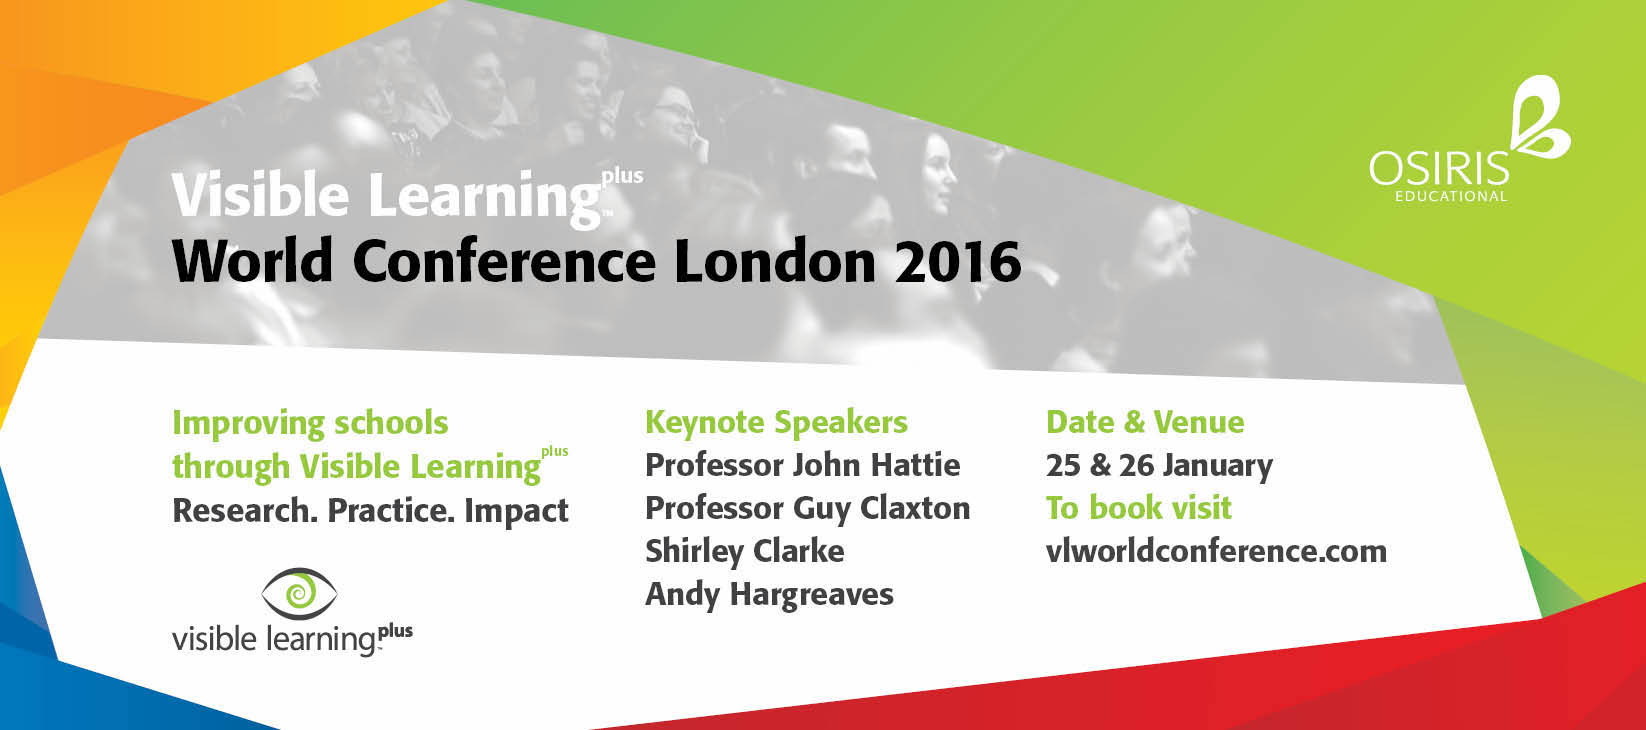 Visible Learning World Conference London 2016